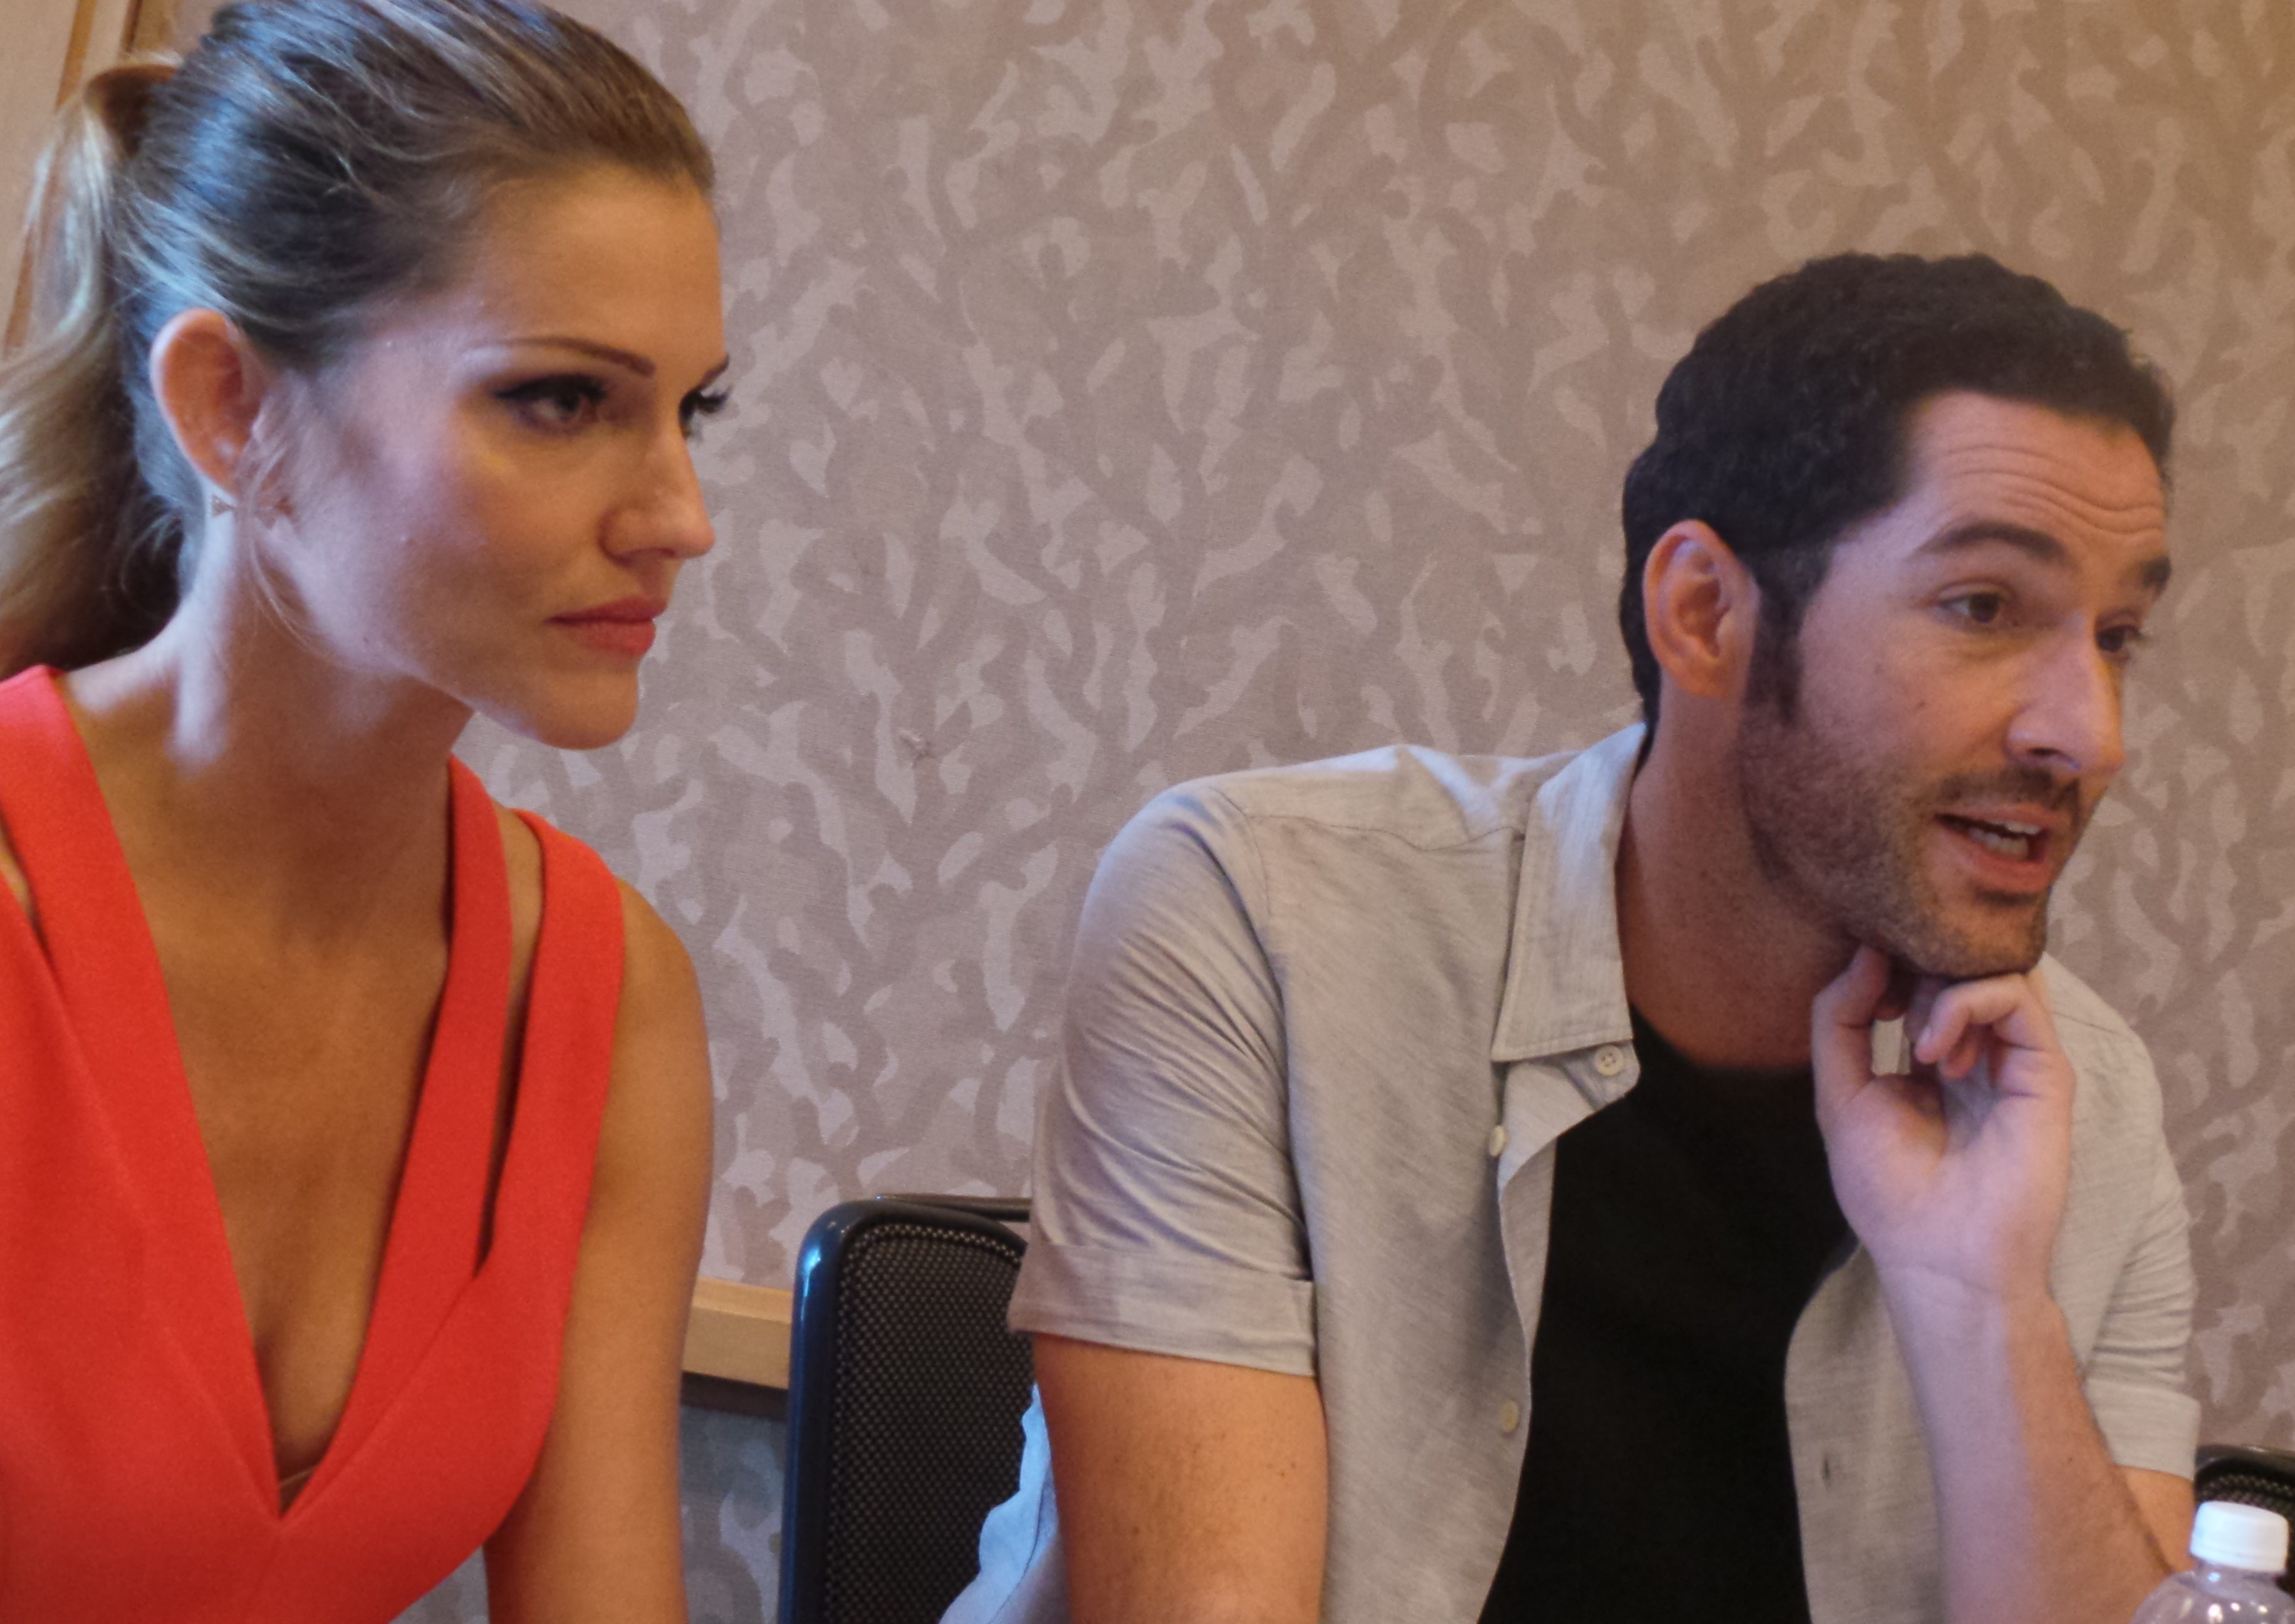 Tom Ellis (Lucifer Morningstar) and Tricia Helfer (will debut in season 2 as The Mother of Angels)